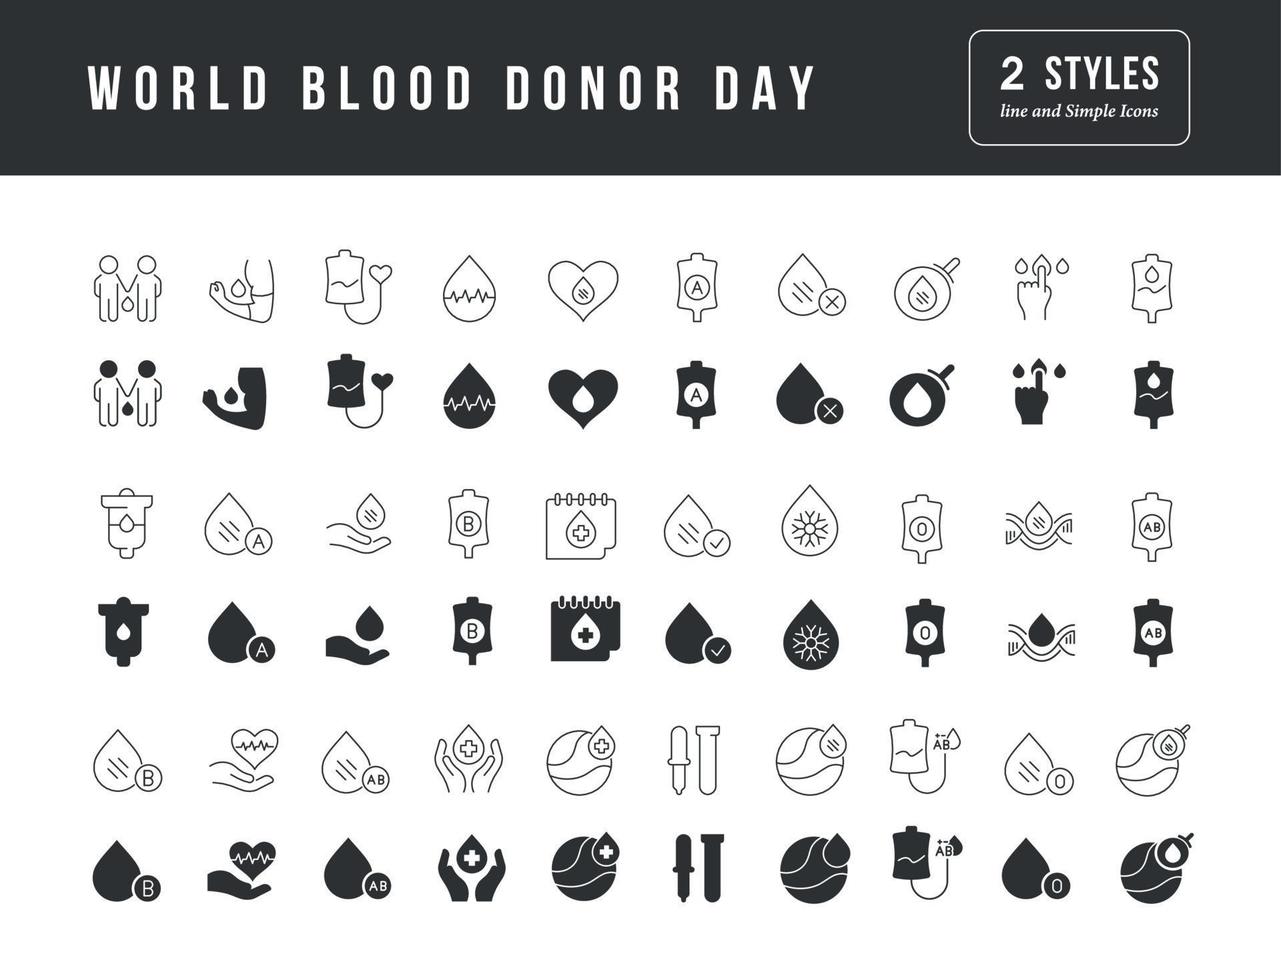 Vector Simple Icons of World Blood Donor Day